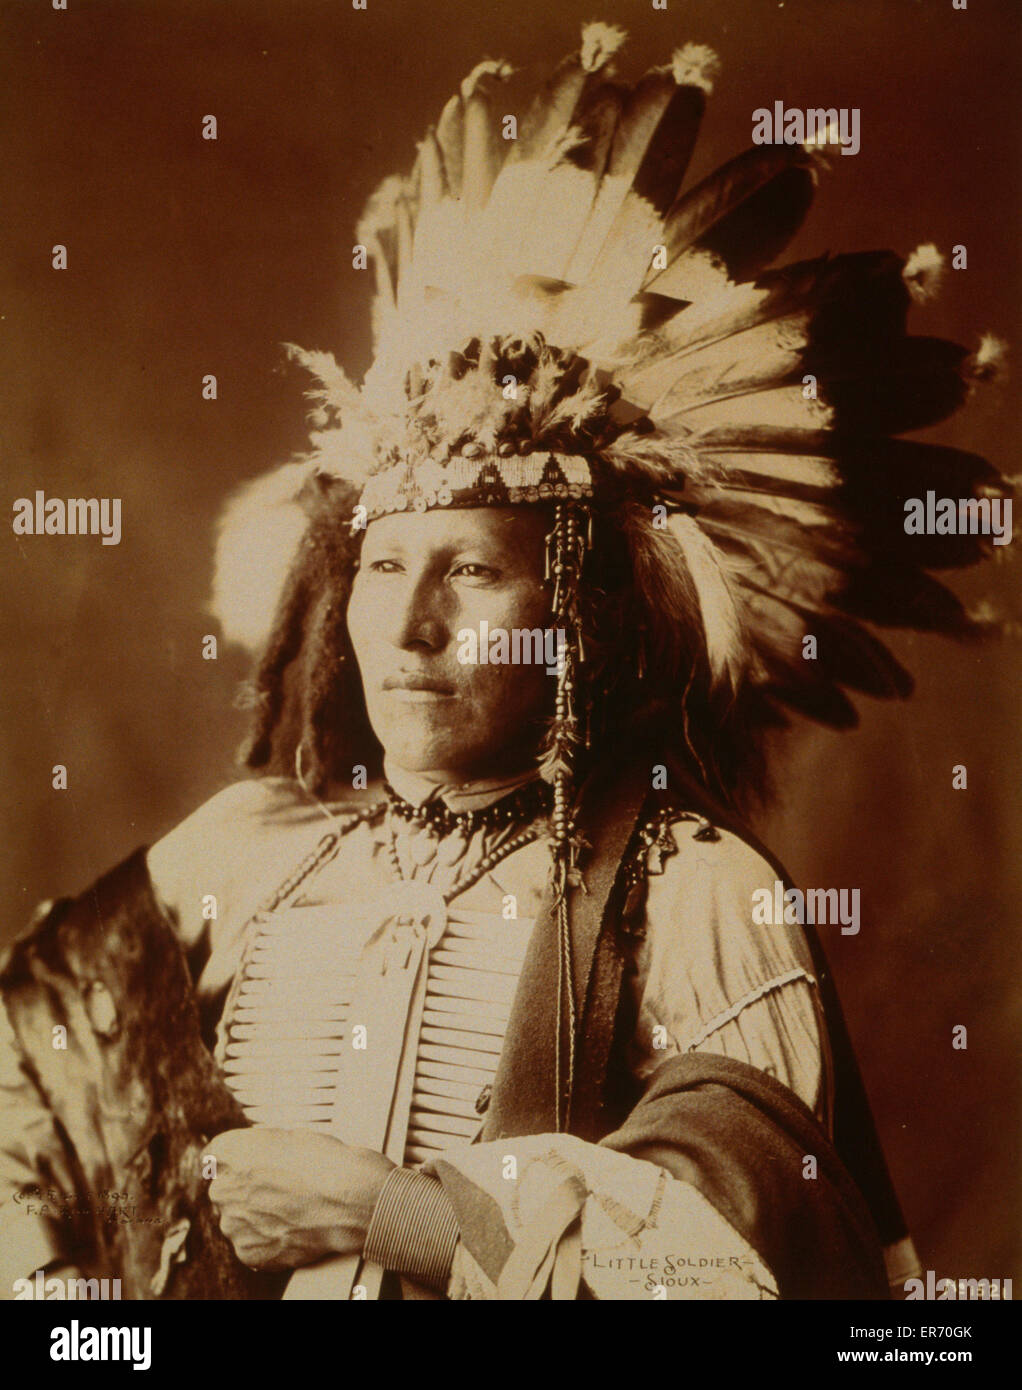 Little Soldier - Sioux, American Indian Stock Photo